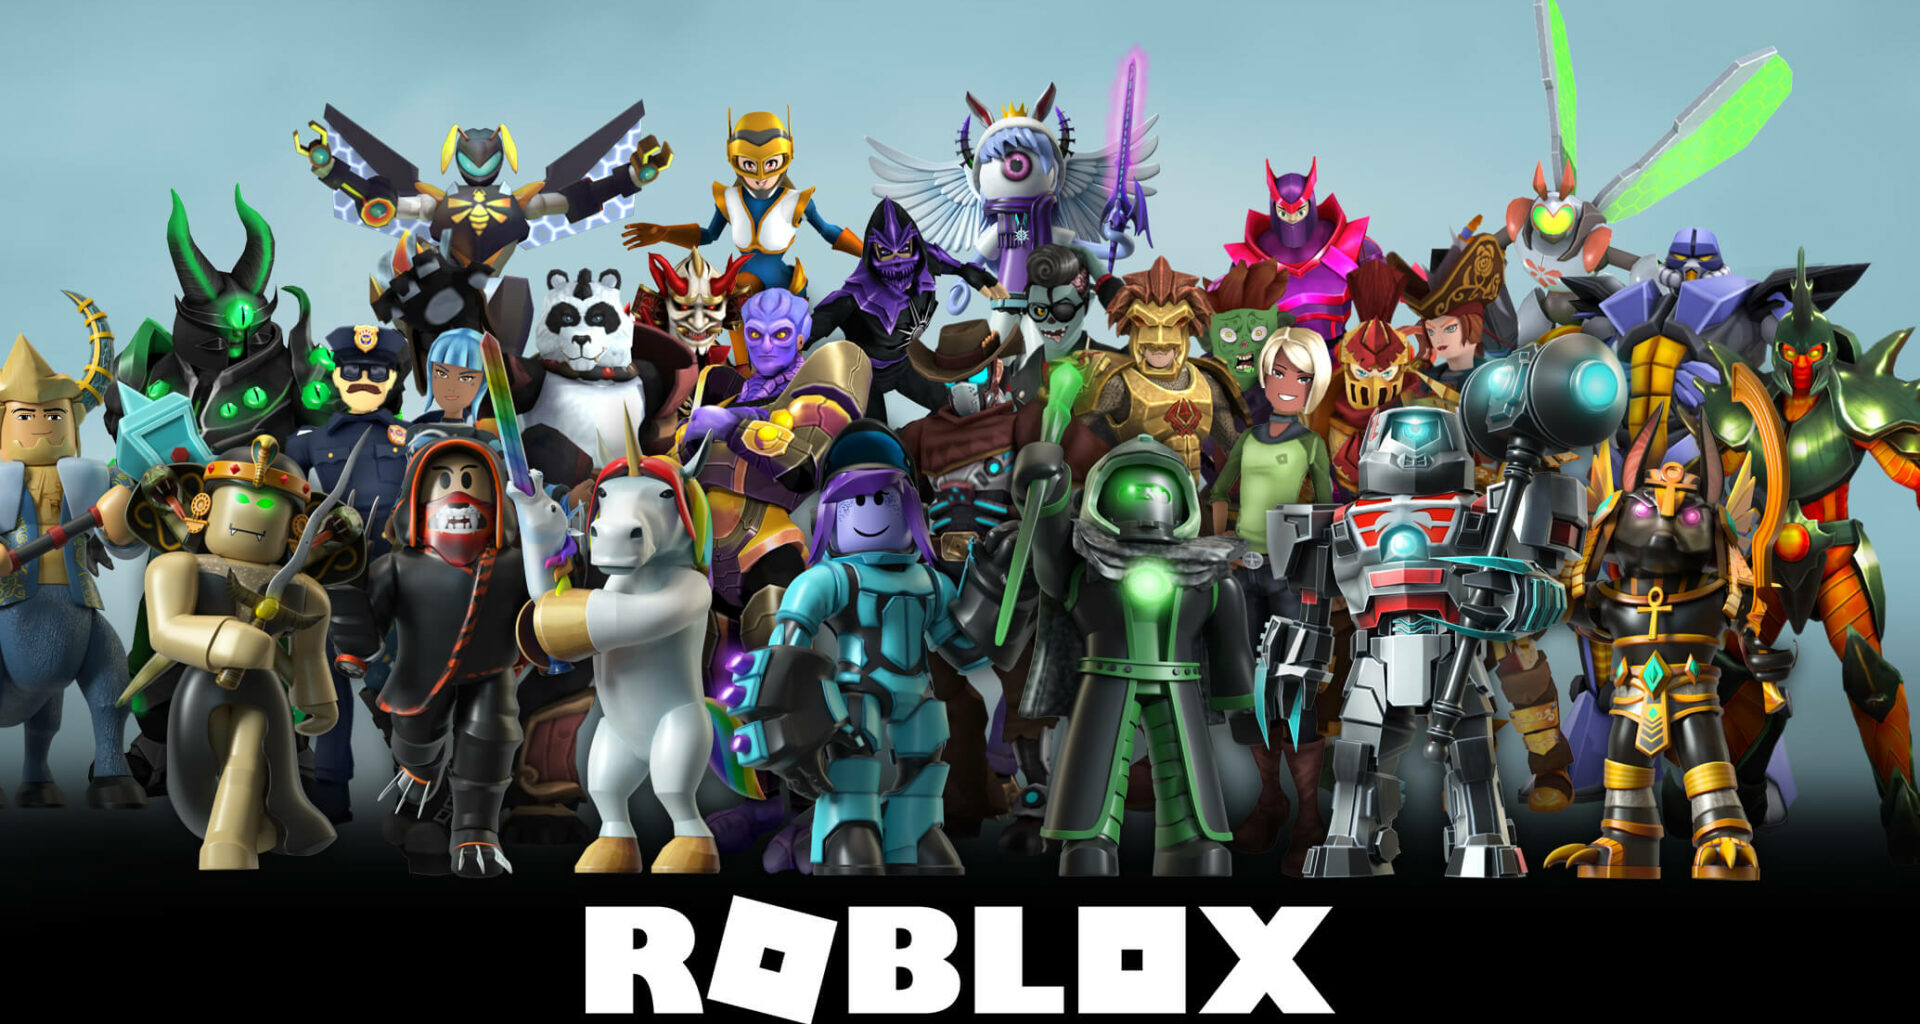 Download Roblox Apk For Free If You Can T Get Minecraft Apk Legally - roblox apk download 2018